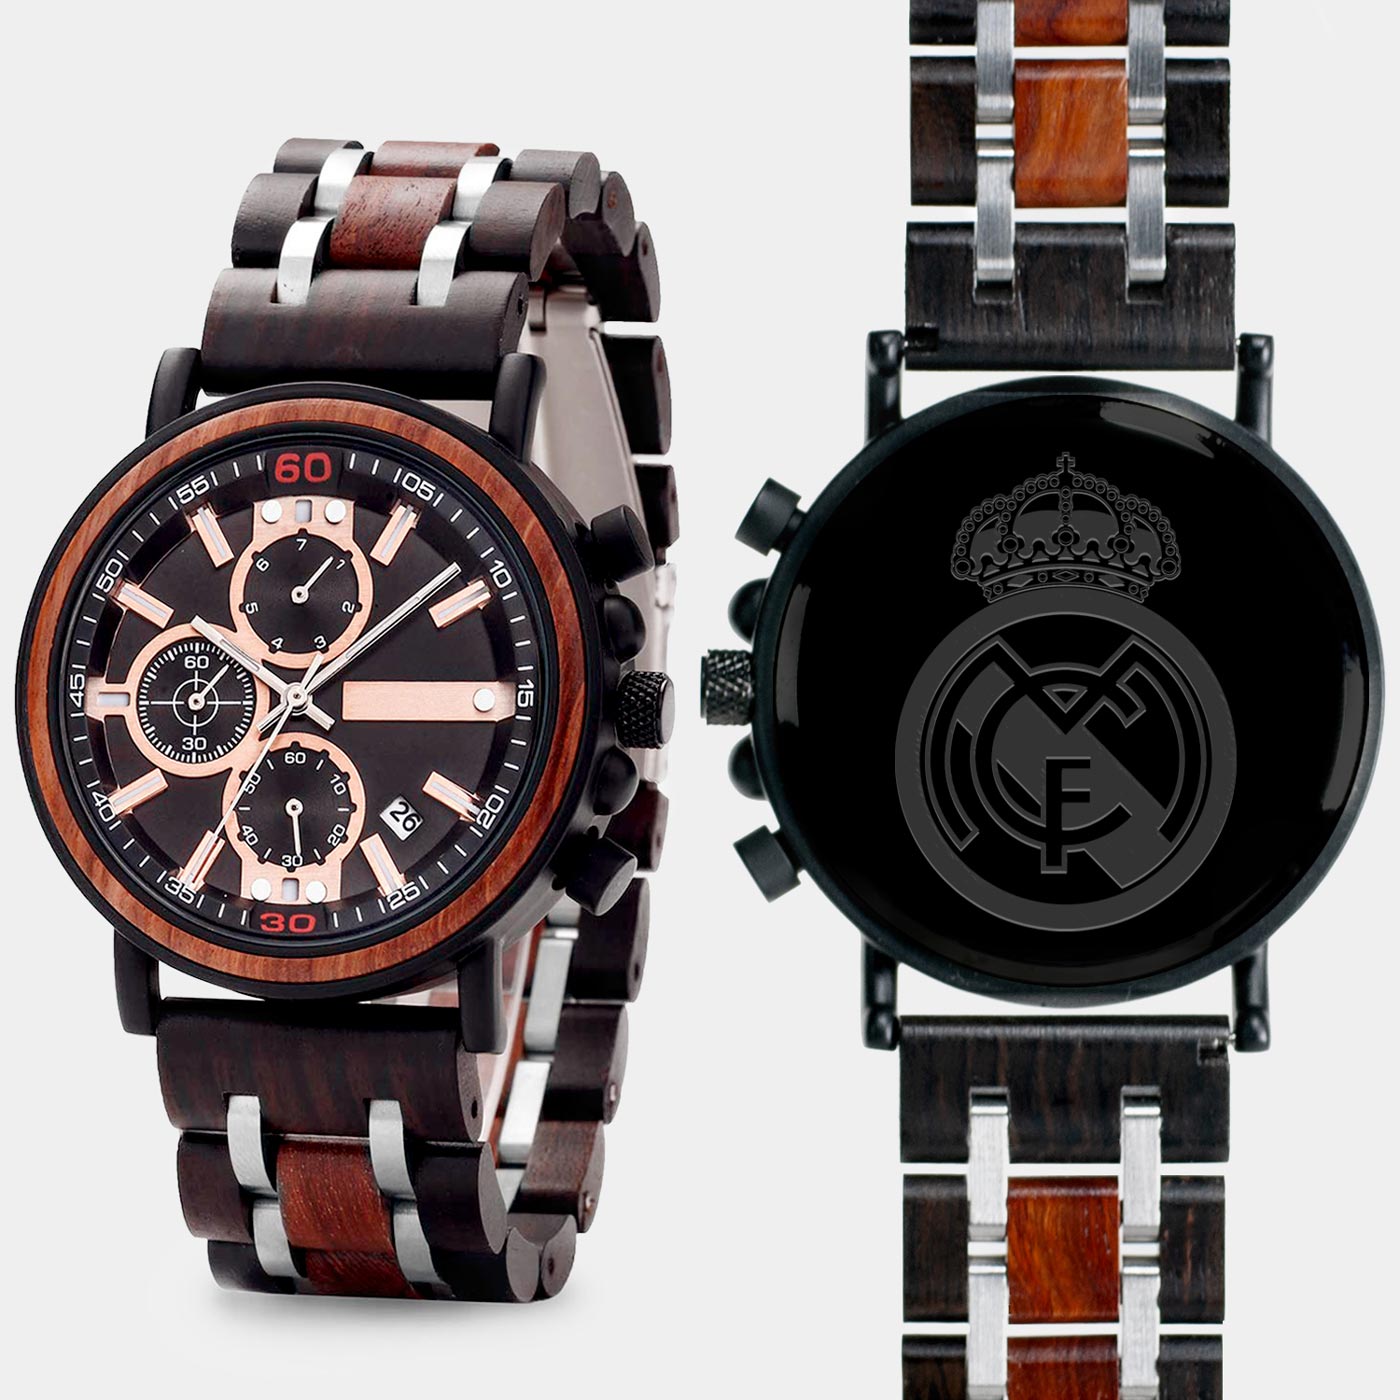 Real Madrid C.F. Mens Wrist Watch  - Personalized Real Madrid C.F. Mens Watches - Custom Gifts For Him, Birthday Gifts, Gift For Dad - Best 2022 Real Madrid C.F. Christmas Gifts - Black 45mm FC Wood Watch